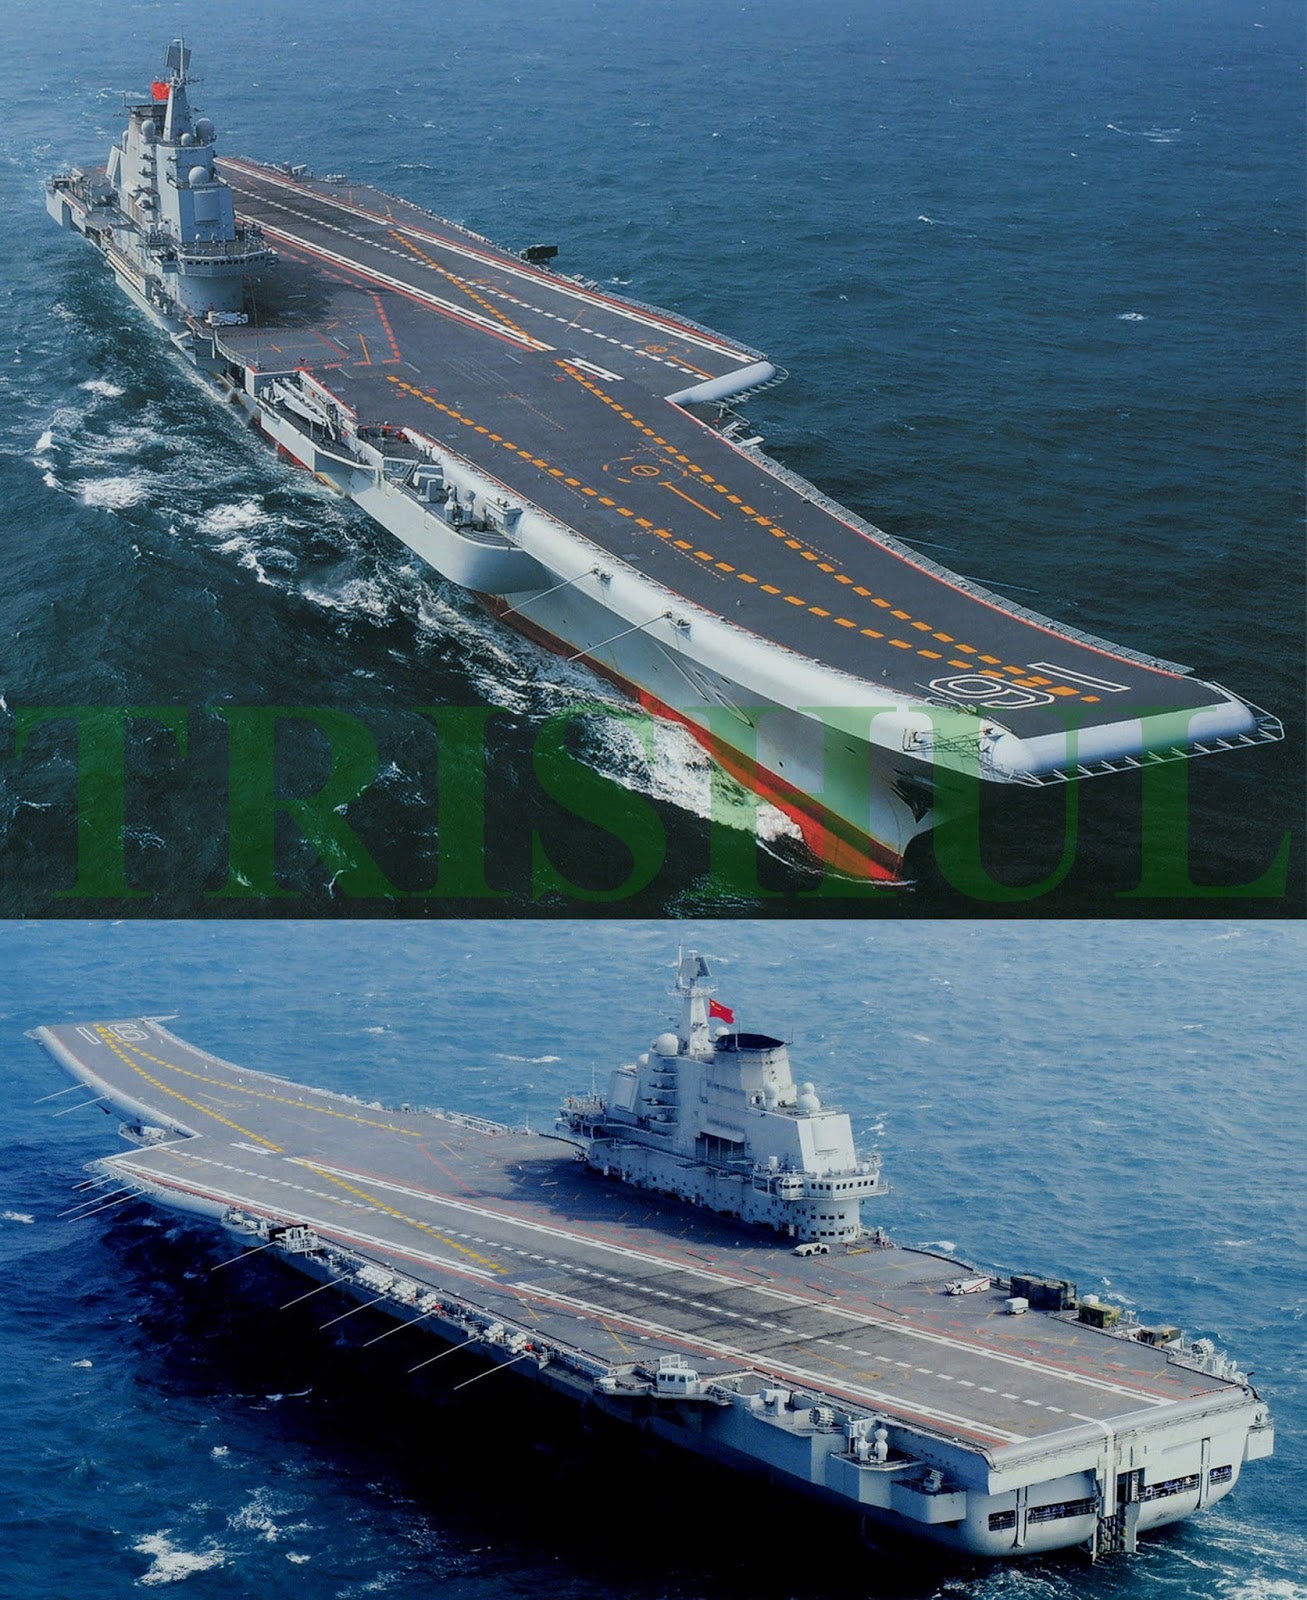 Liaoning%2BCV-16%2527s%2Bsuperstructure.jpg